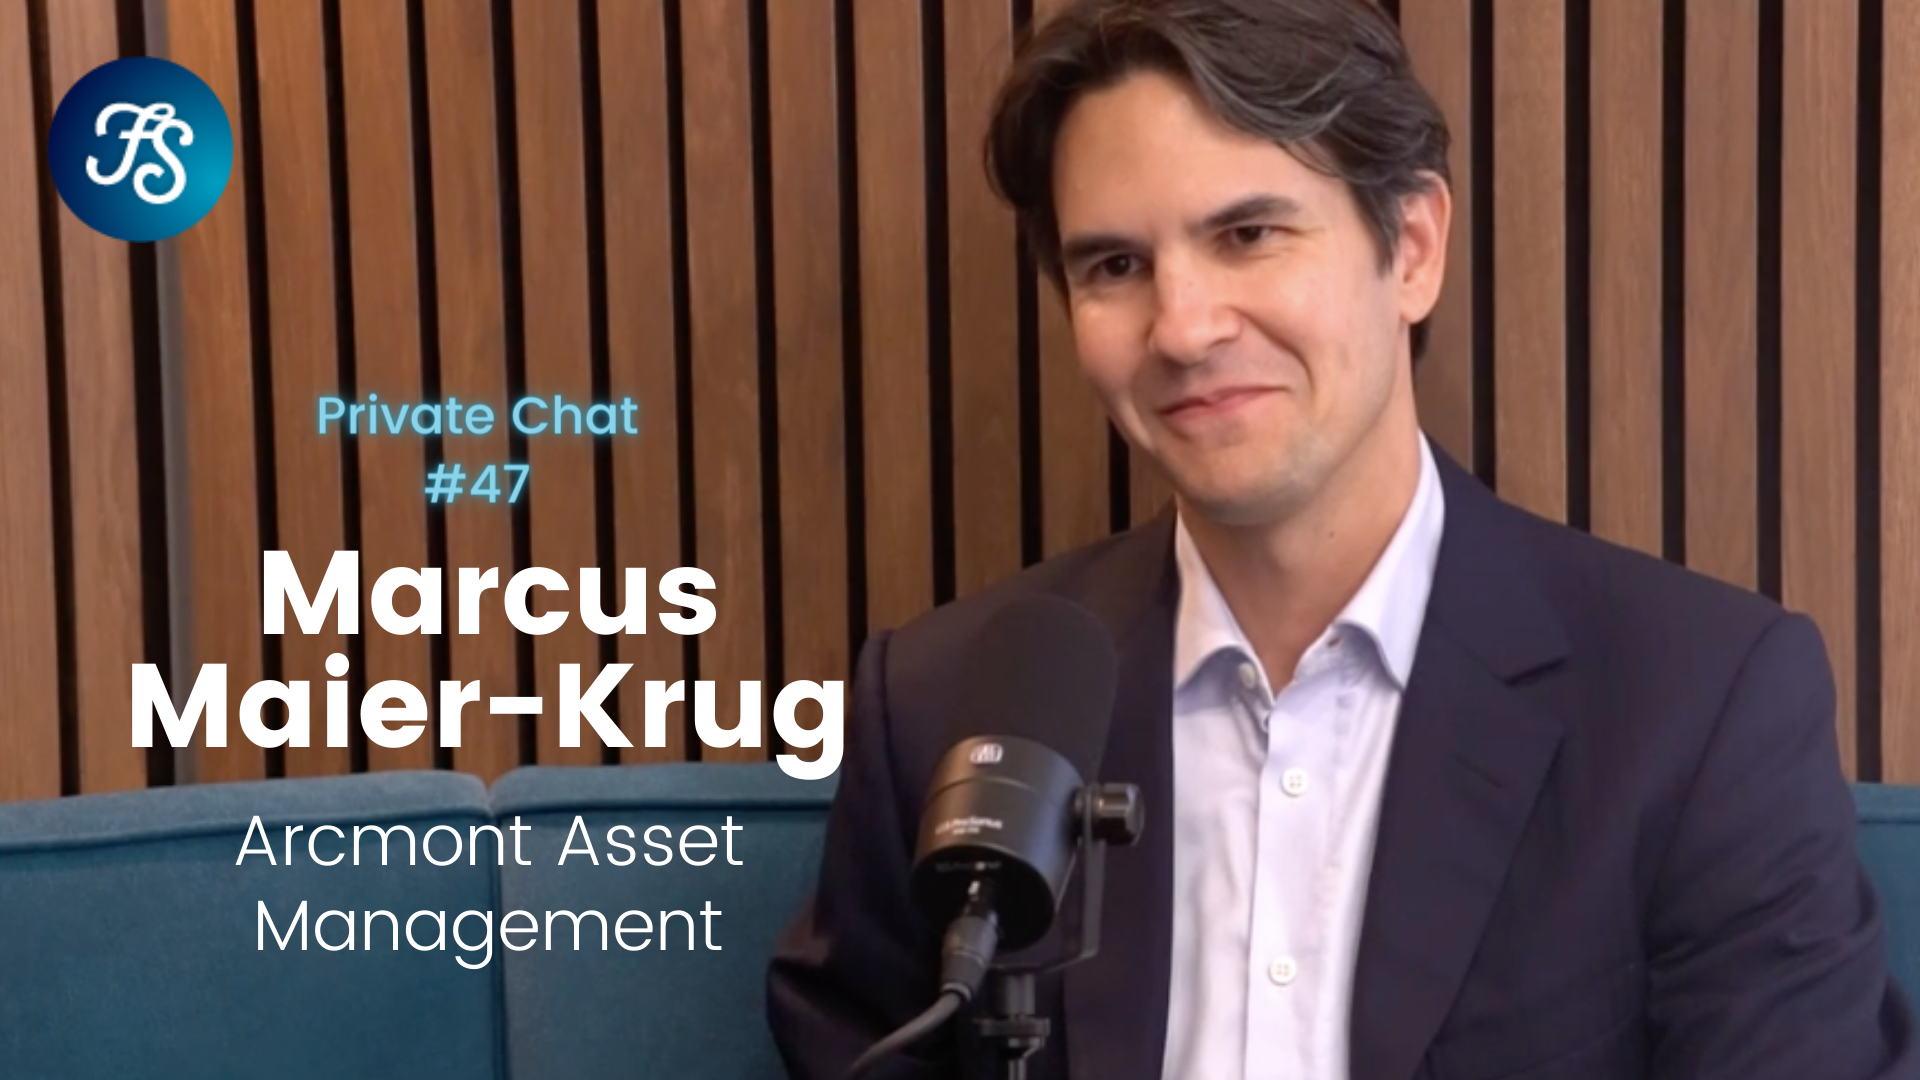 Marcus Maier-Krug, Arcmont, Fund Shack private equity podcast, private credit